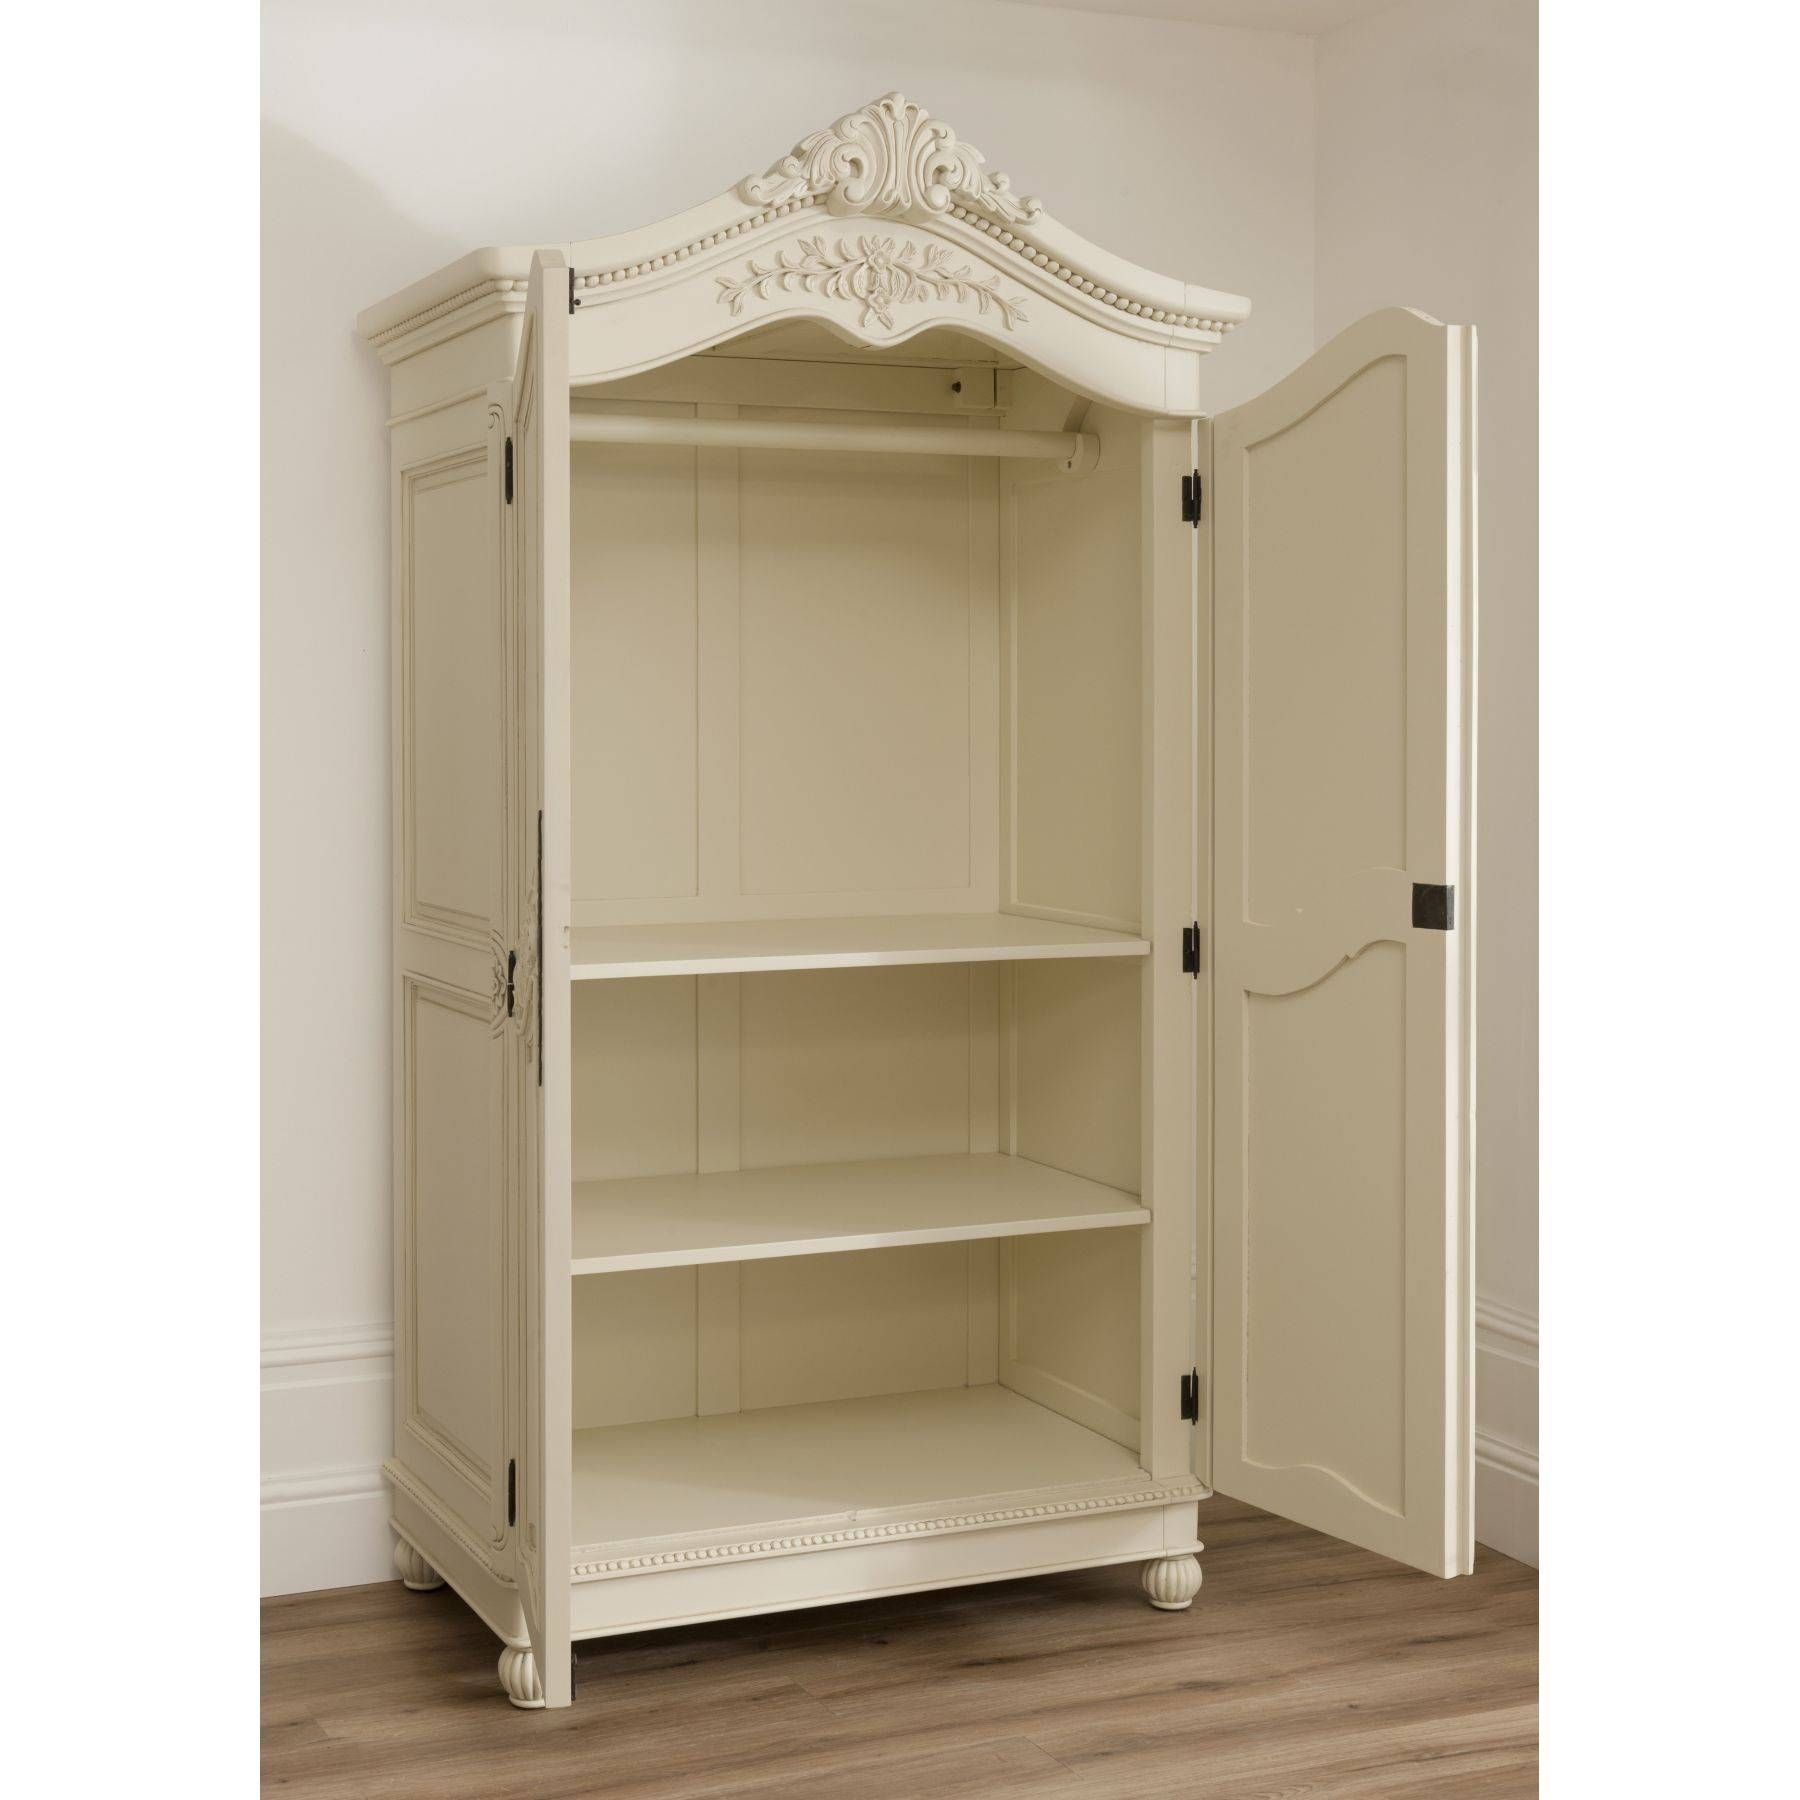 Bordeaux Ivory Shabby Chic Wardrobe | Shabby Chic Furniture Throughout Ivory Wardrobes (View 2 of 15)